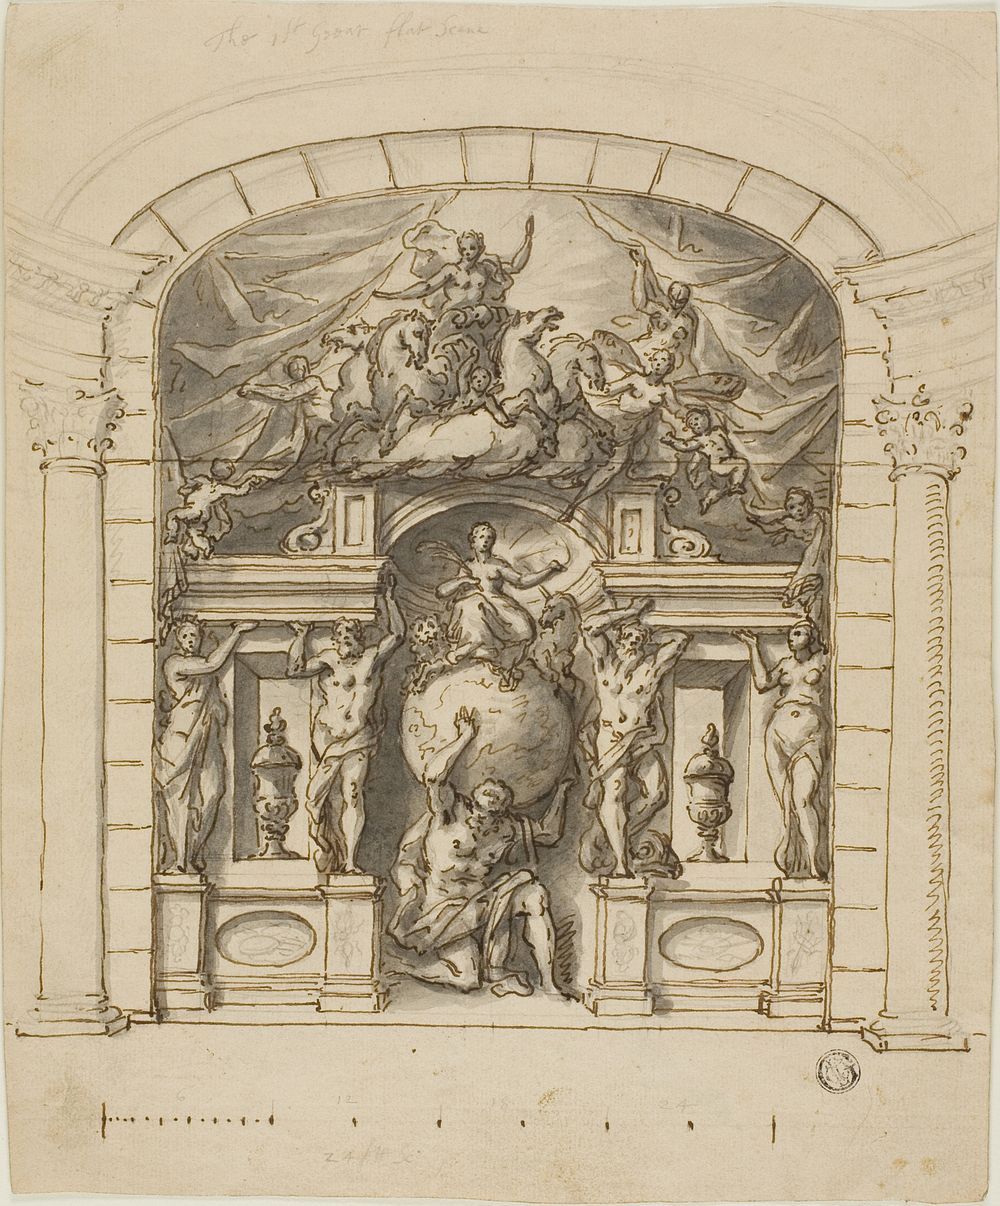 Design for Stage Scenery (Hampton Court) with Mythological Figures by James Thornhill